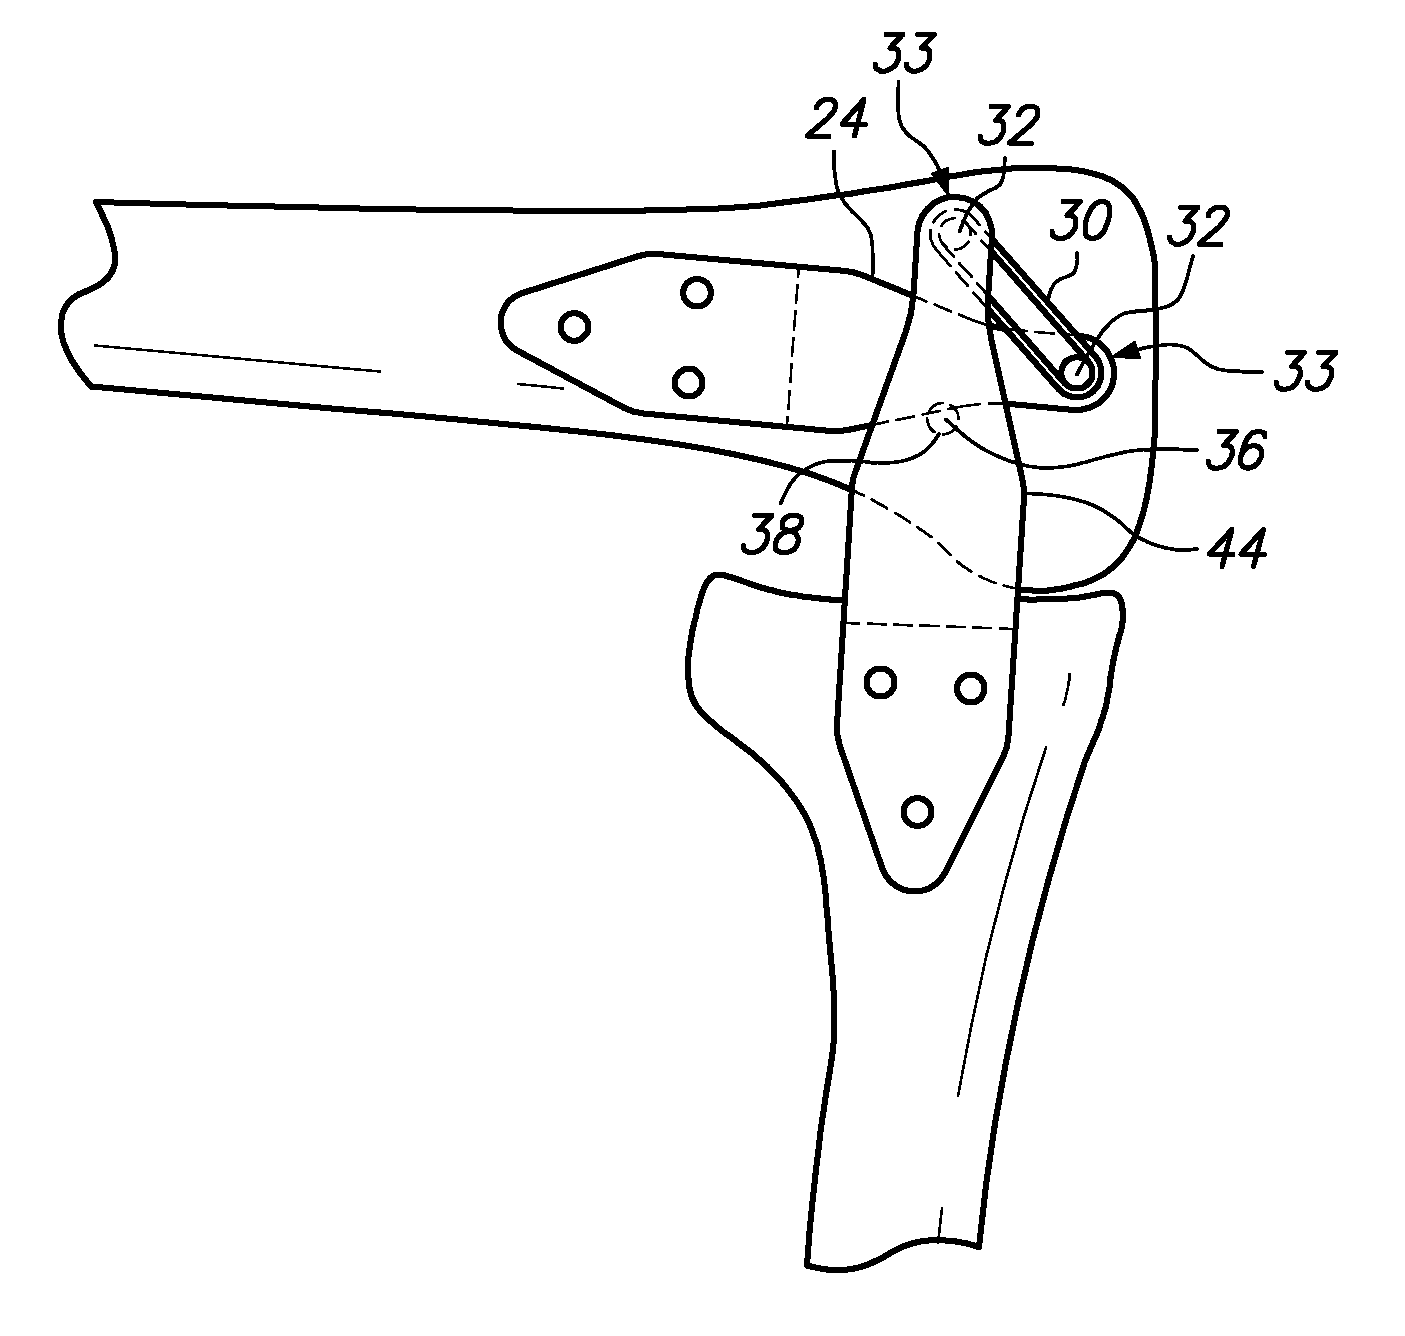 Extra-articular implantable mechanical energy absorbing assemblies having a tension member, and methods